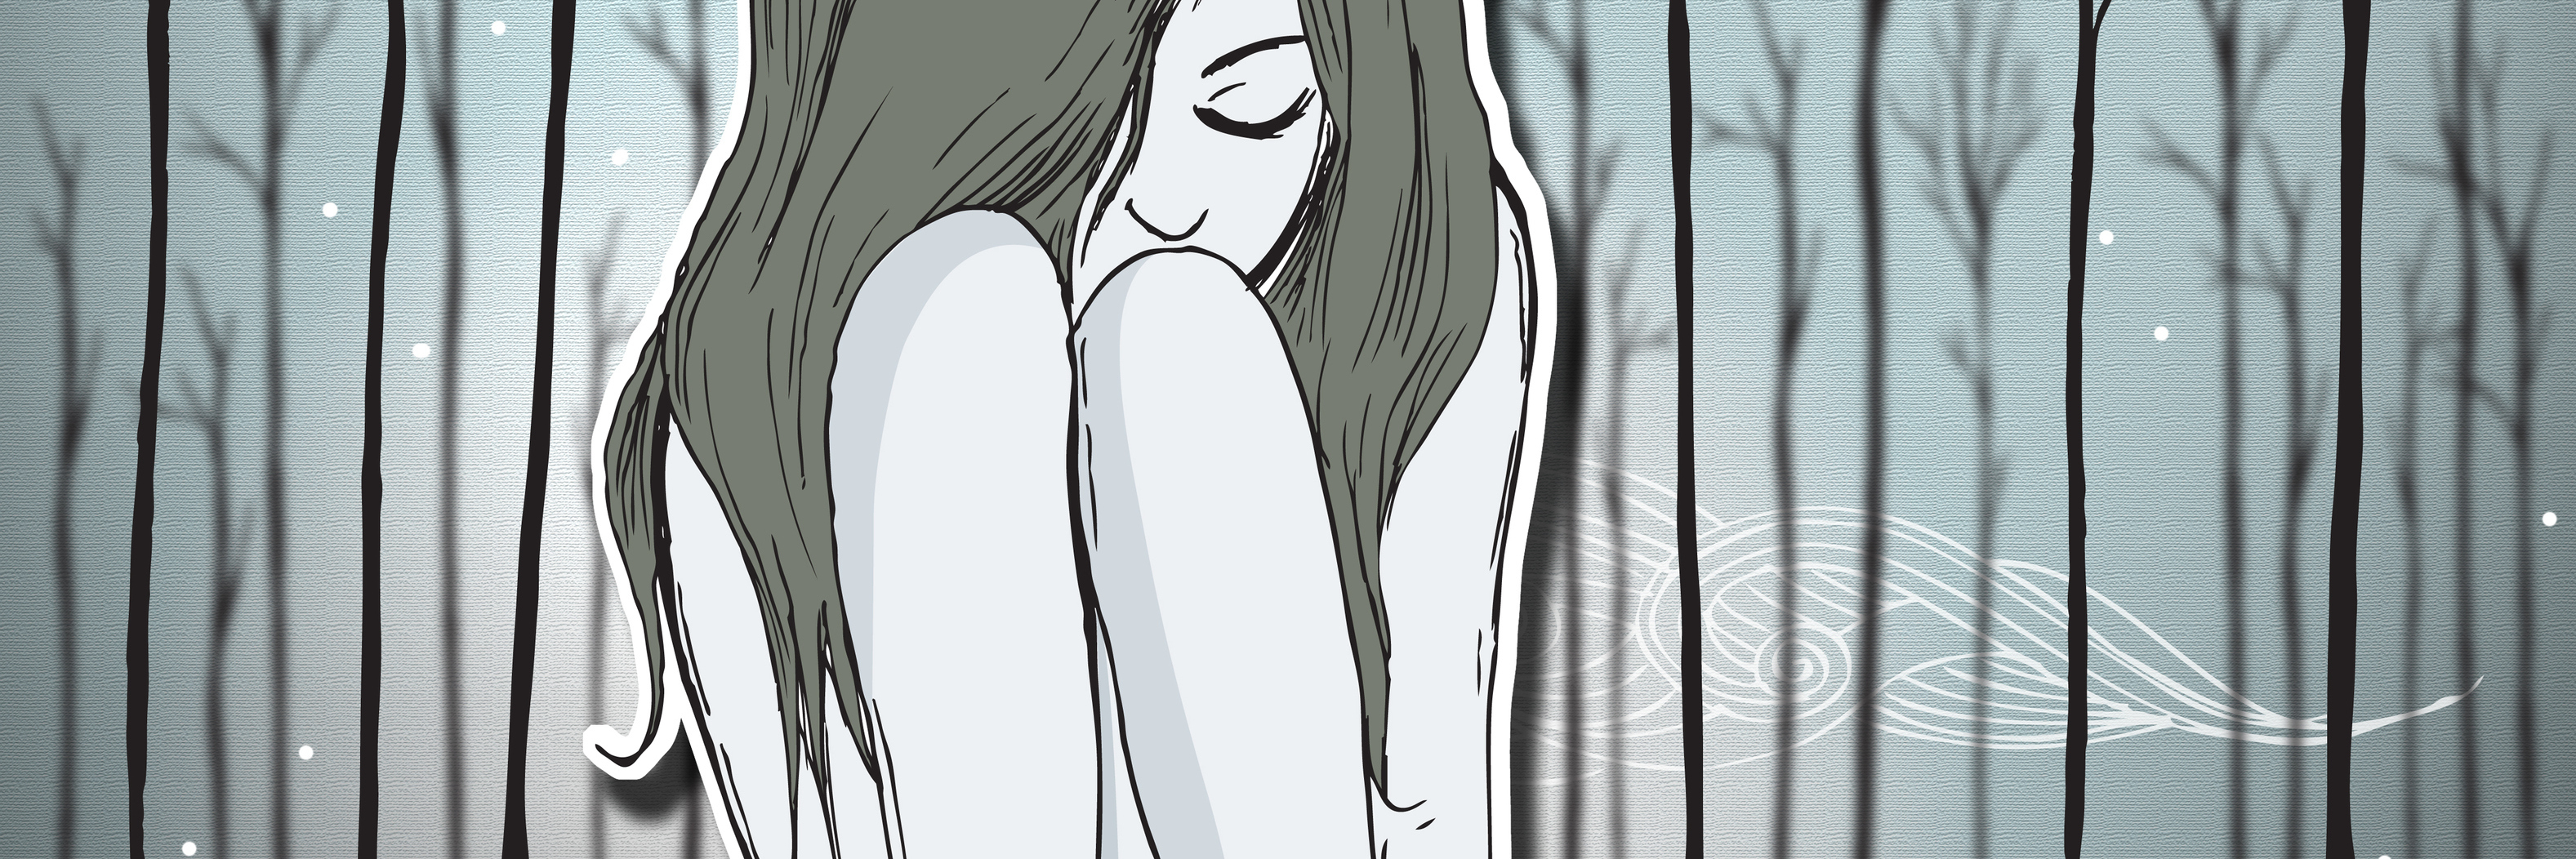 illustration of young woman sitting alone in woods hugging knees